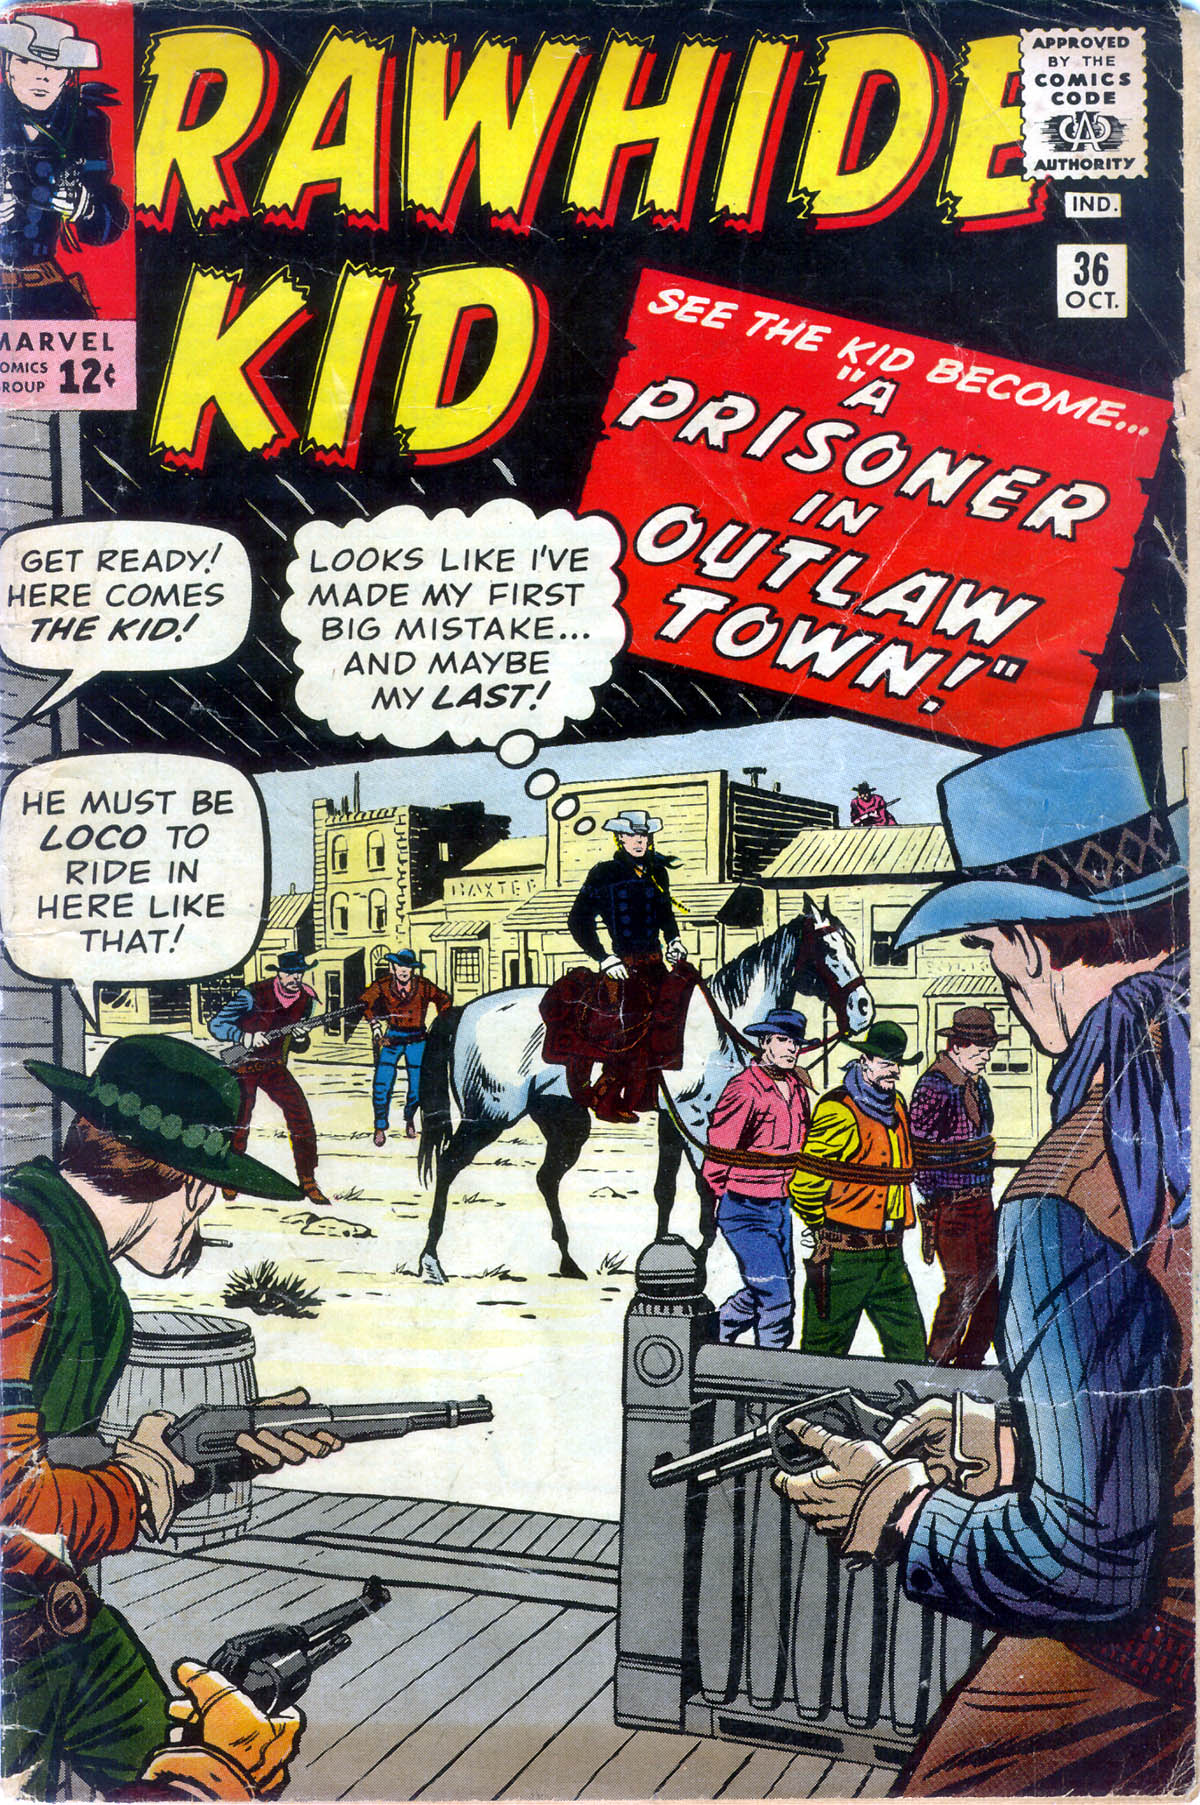 Read online The Rawhide Kid comic -  Issue #36 - 1